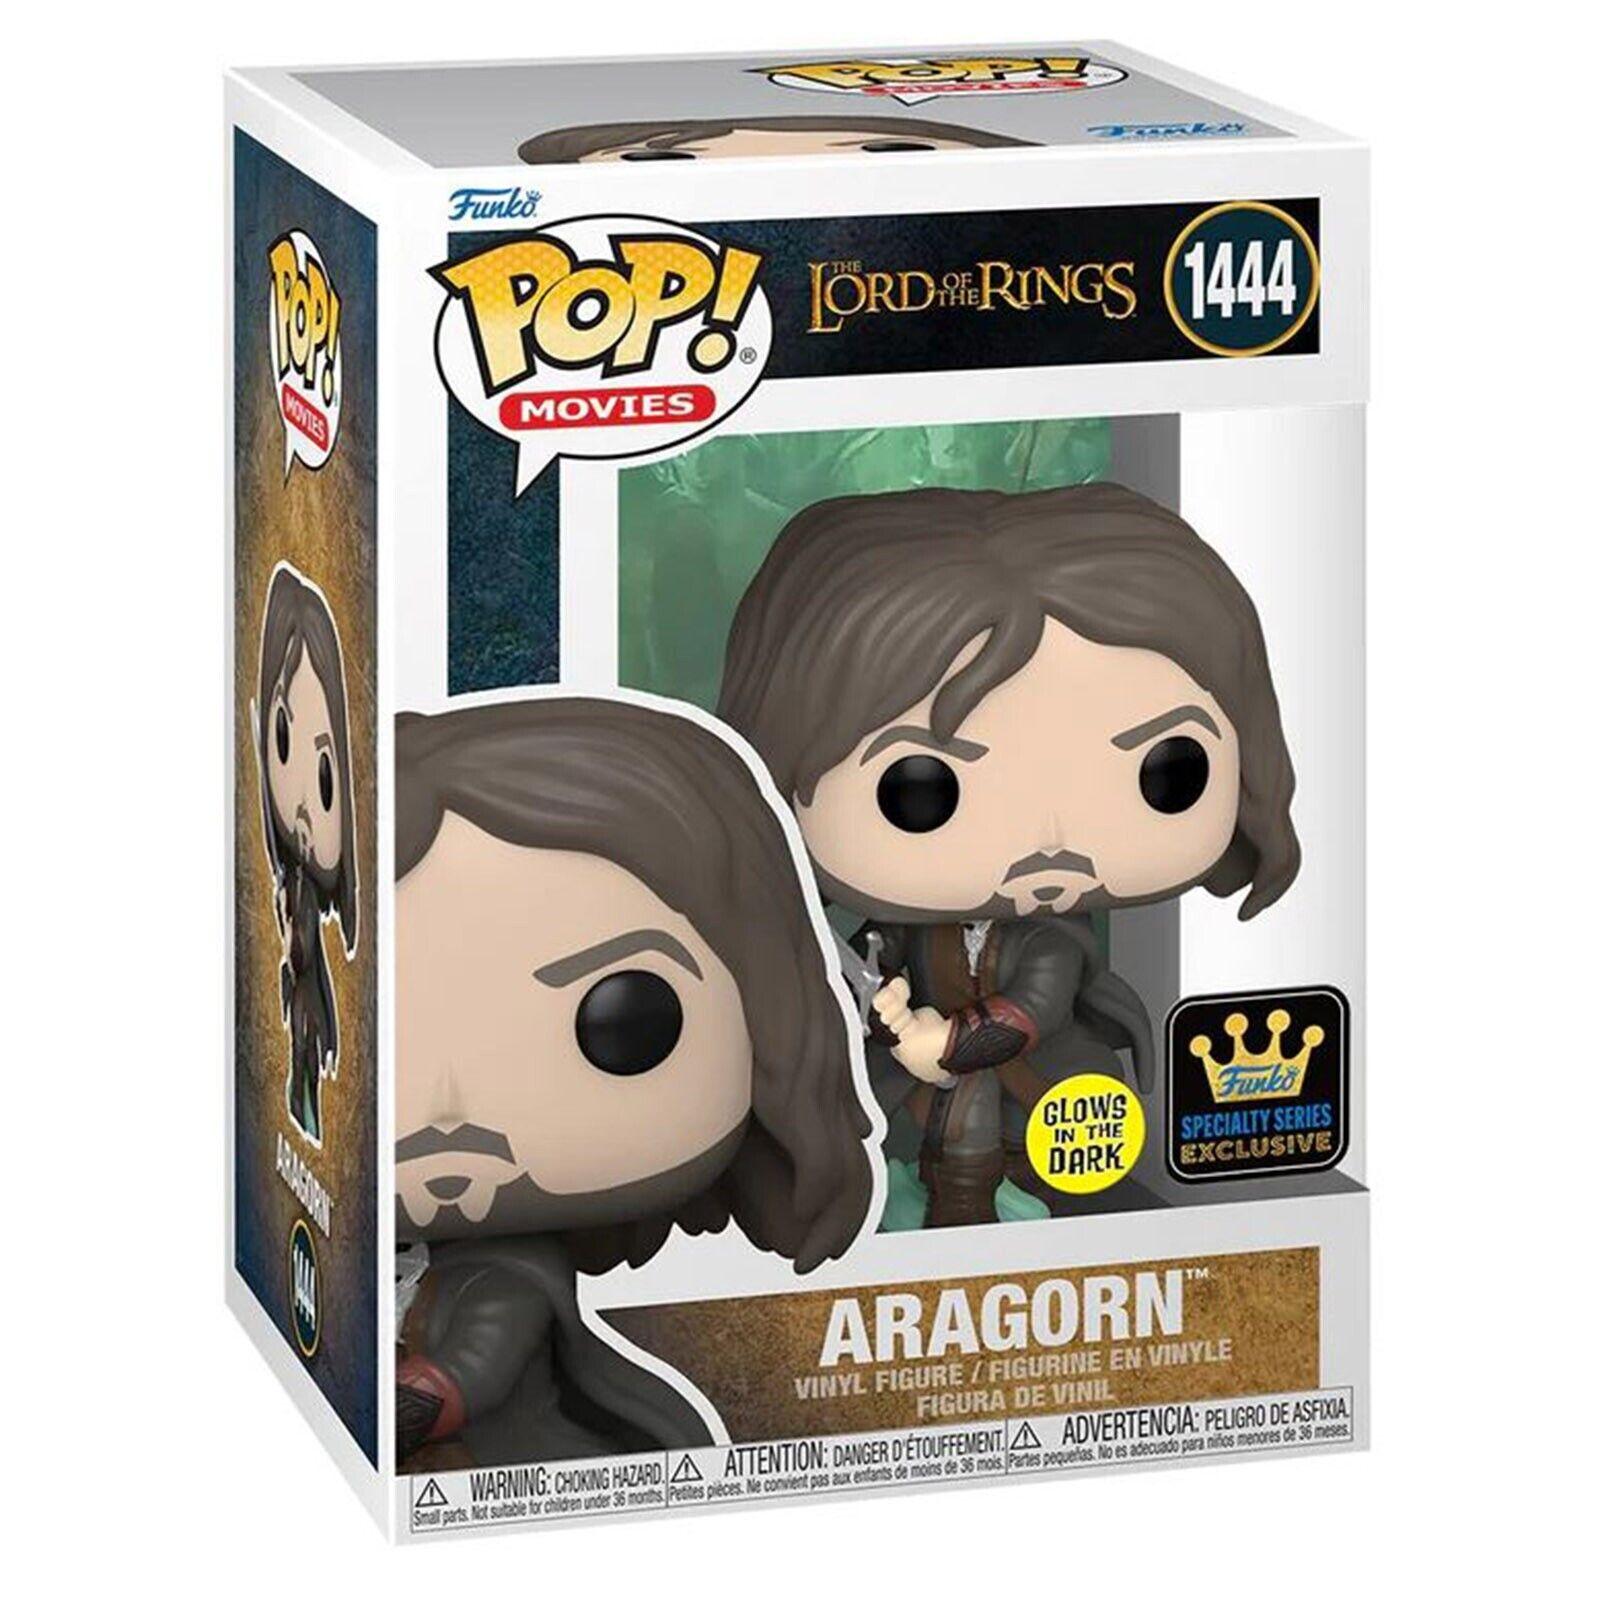 Pop! Movies - Lord Of The Rings - Aragorn - #1444 - Glow In The Dark & Funko Specialty Series EXCLUSIVE - Hobby Champion Inc